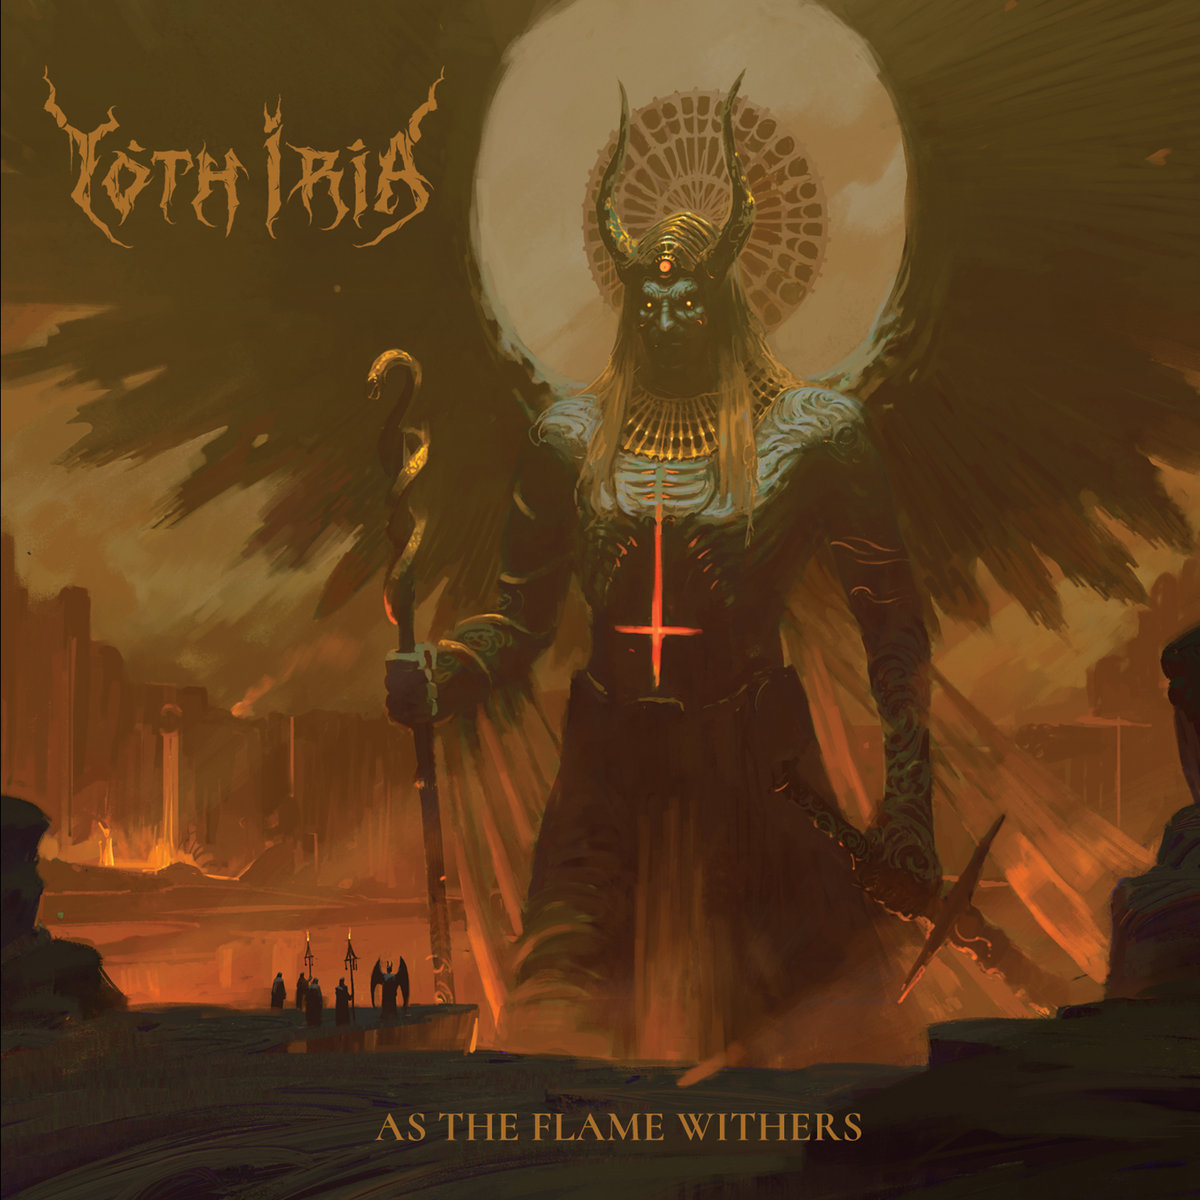 Yoth Iria - As The Flame Withers